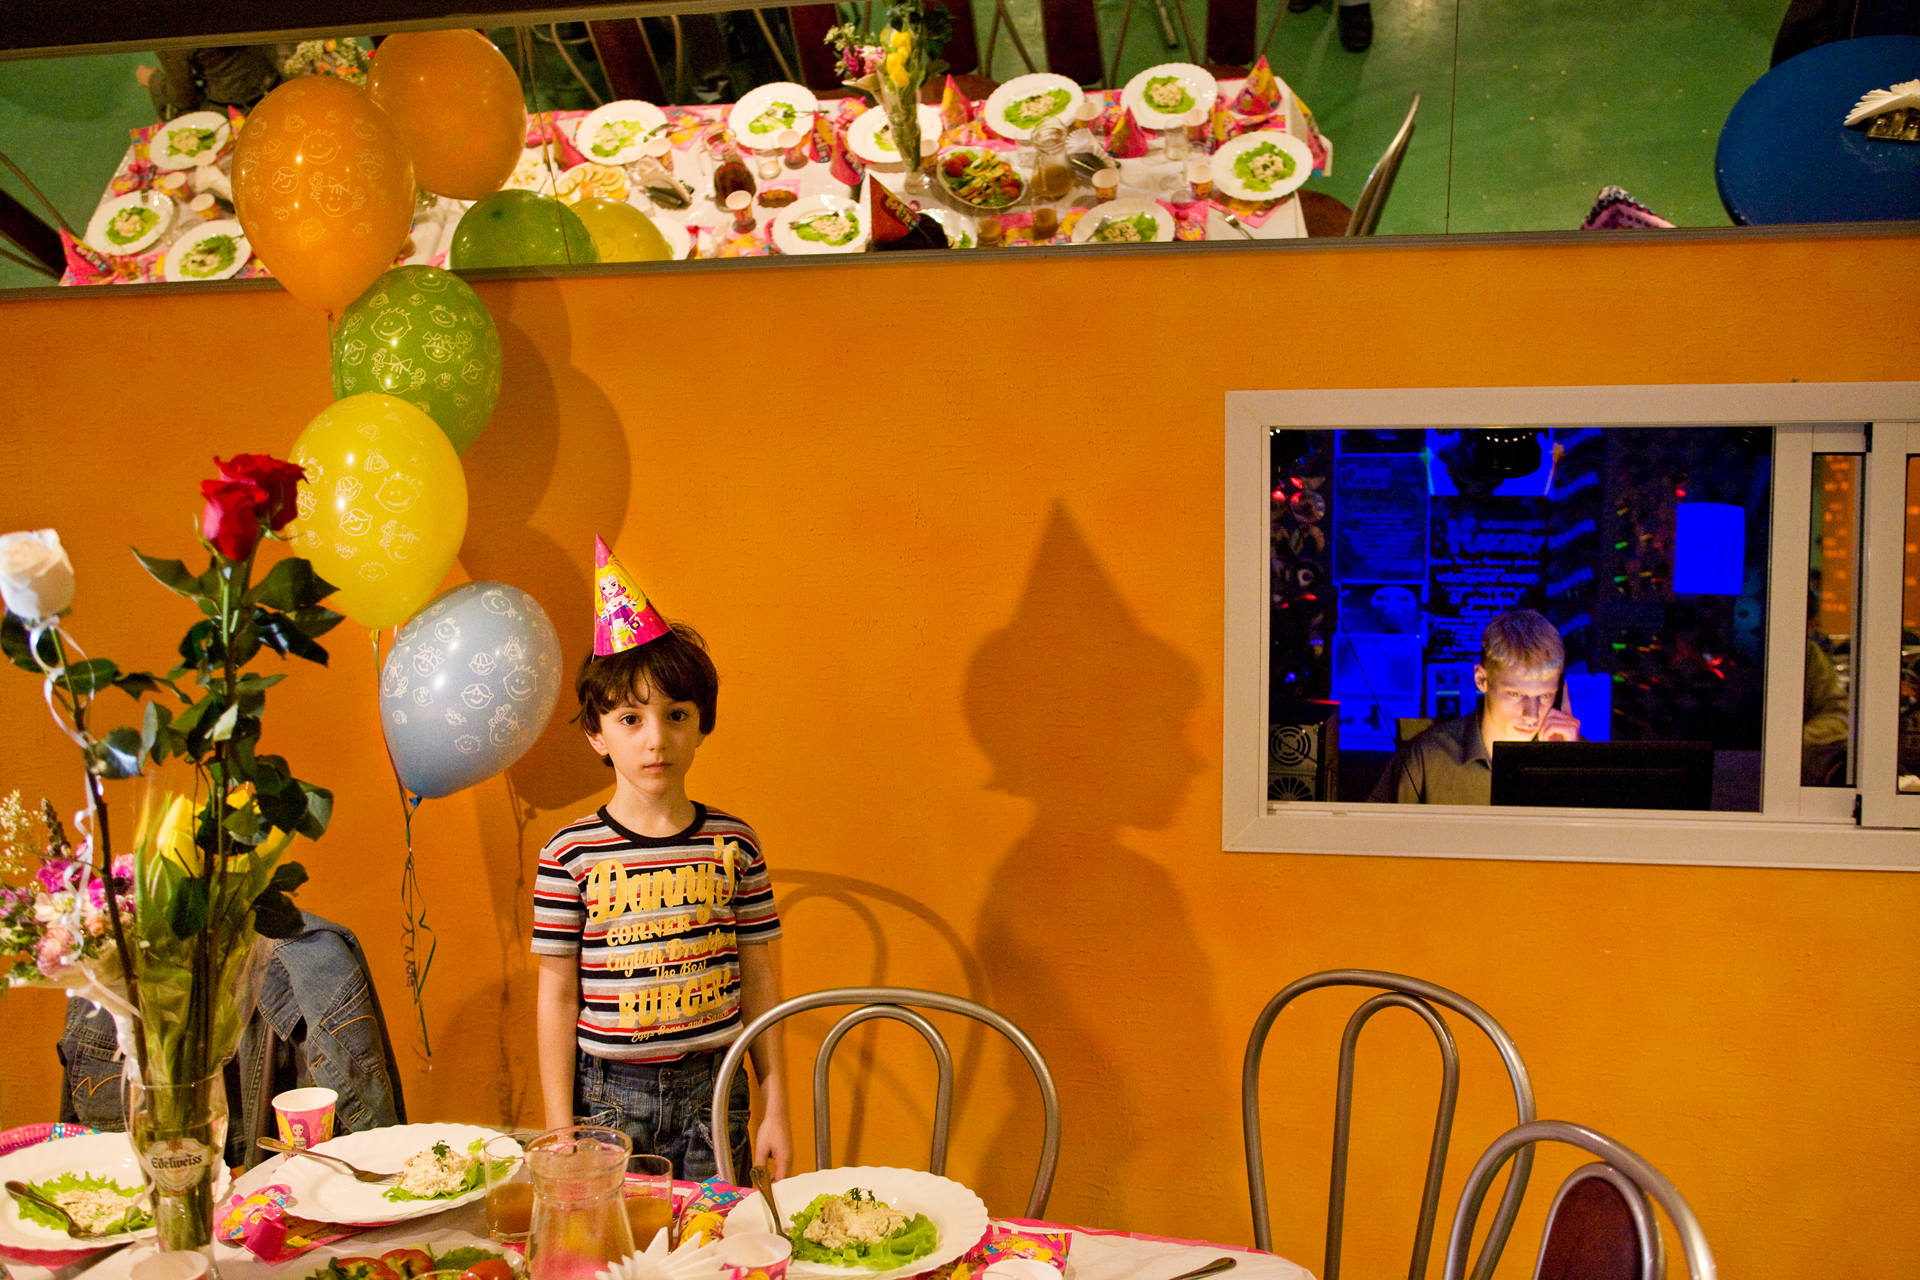  Overwhelmed by a lavish birthday party at the new Orange Parrot Entertainment Center, a young guest pauses during the state-of-the-art celebration.  Surgut, Russia  